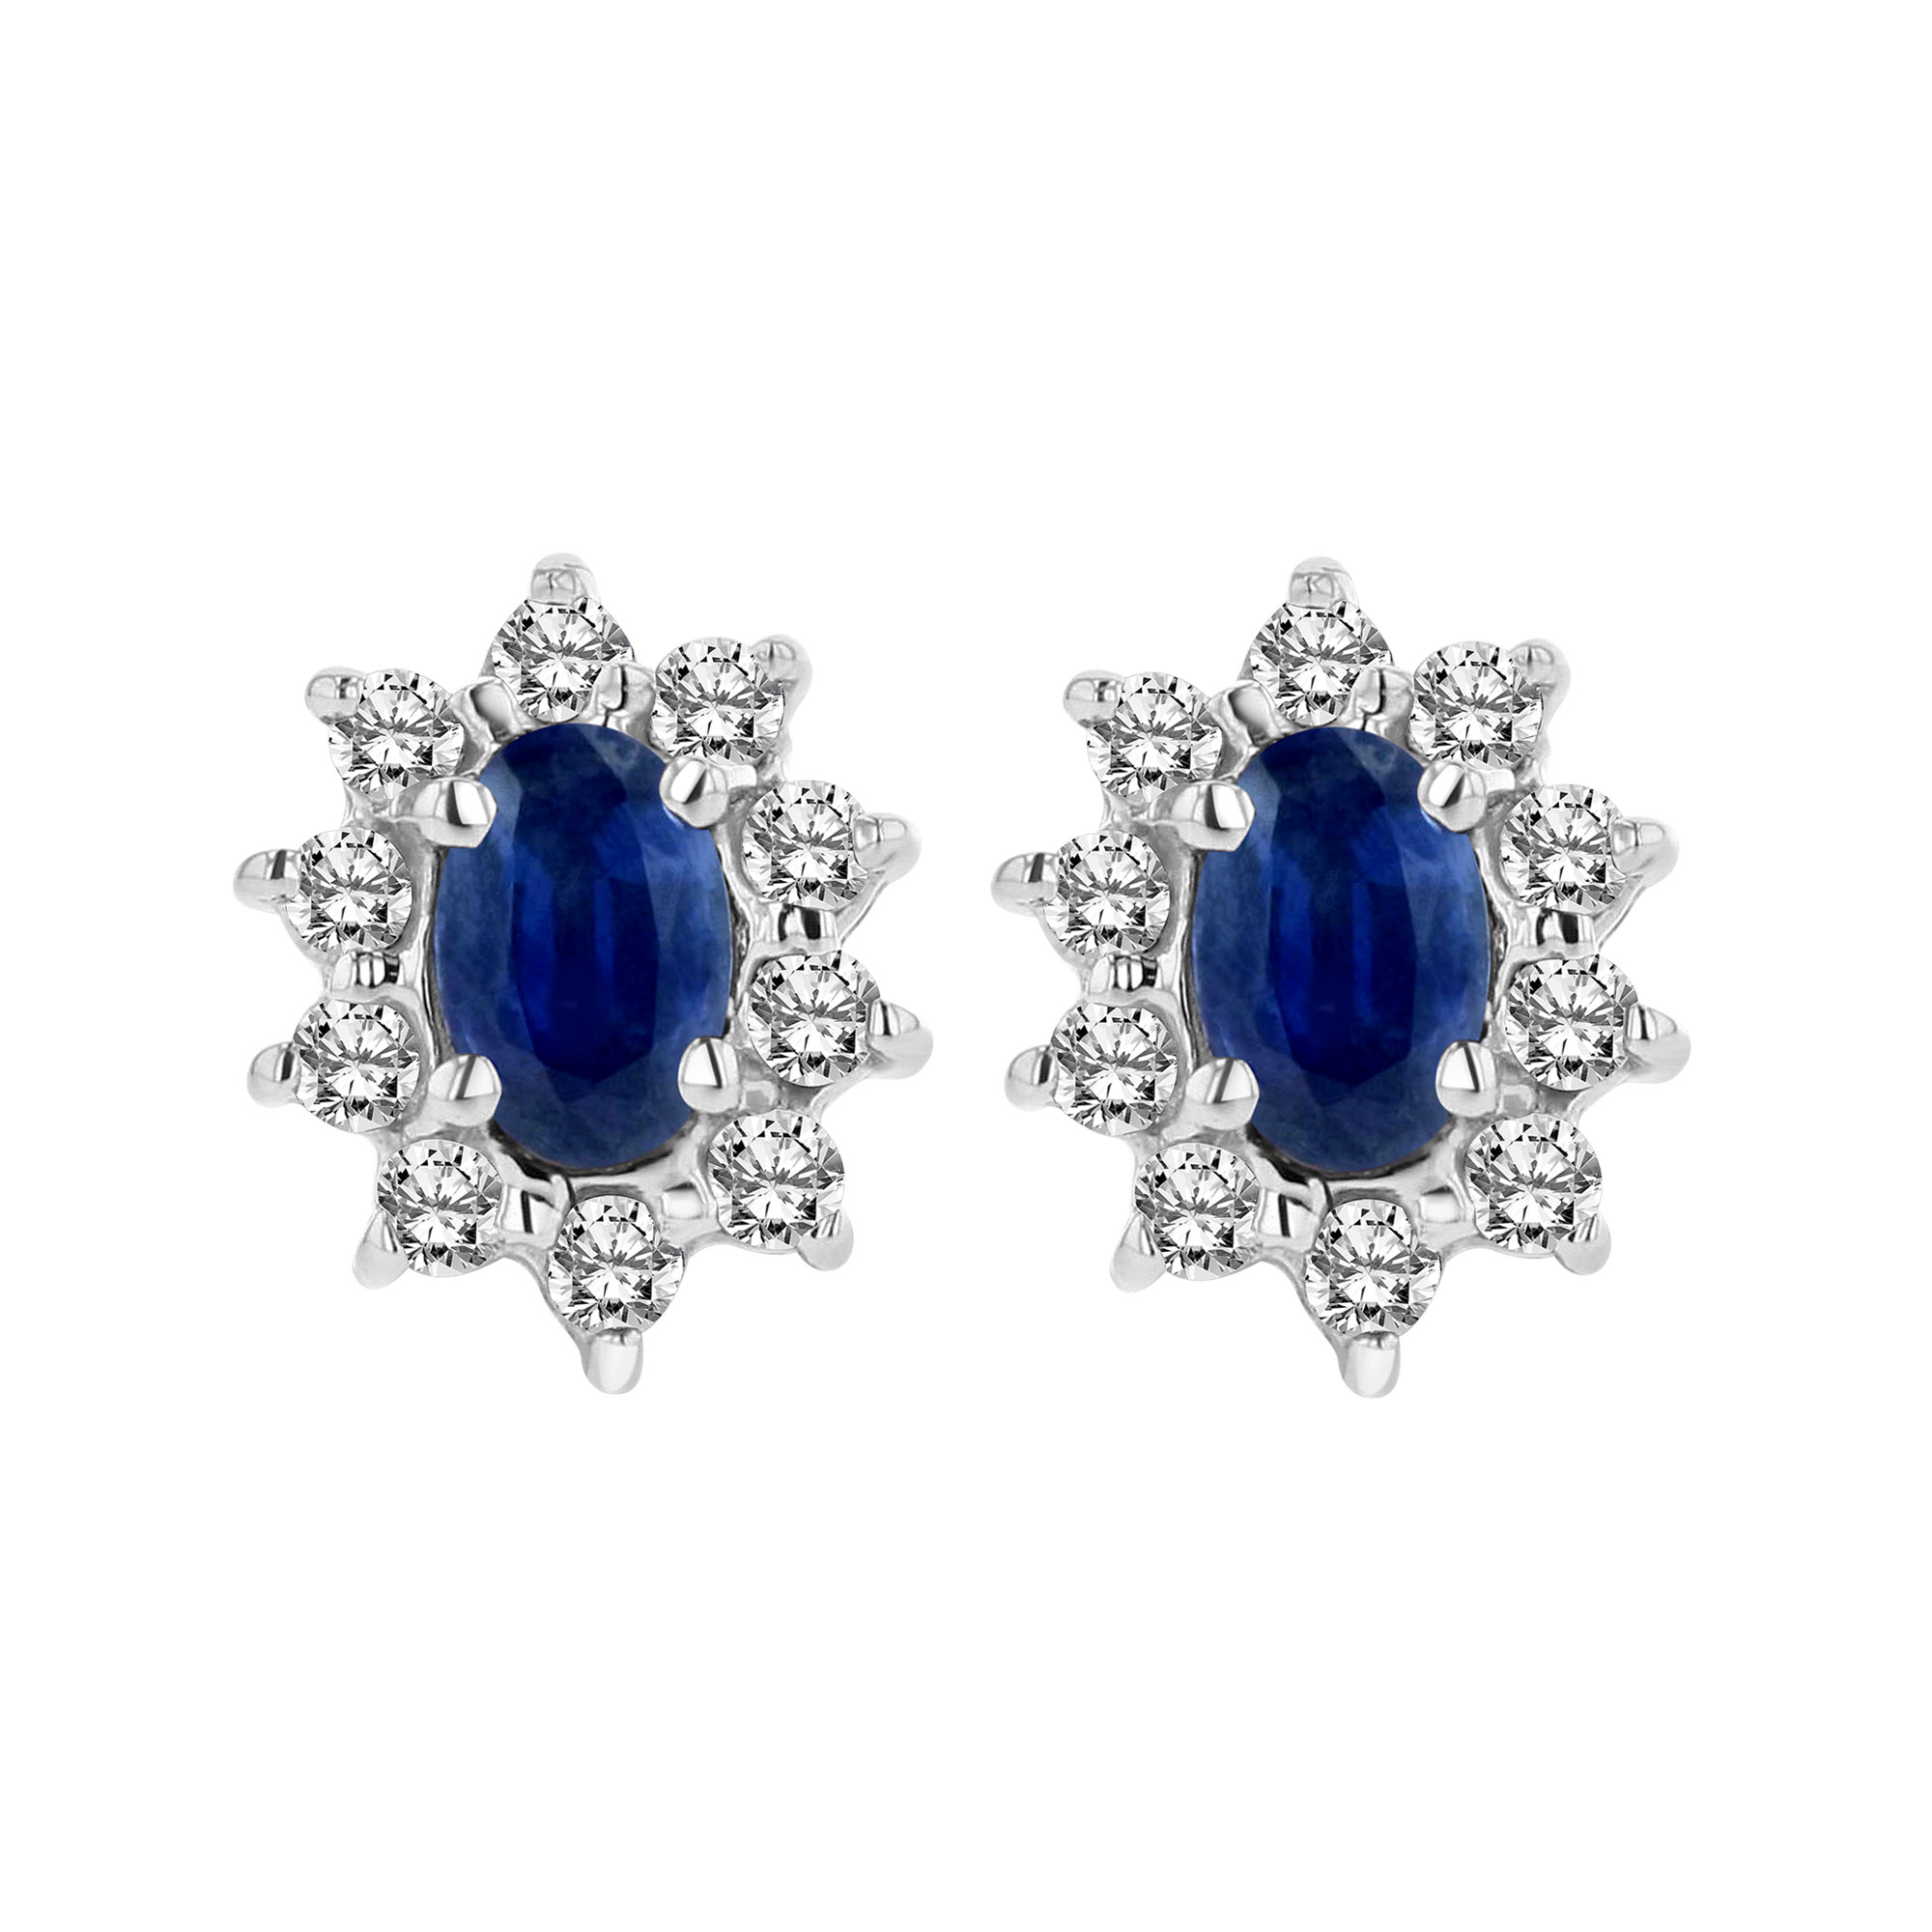 0.70cttw Diamond and Sapphire Earring in 14k Gold